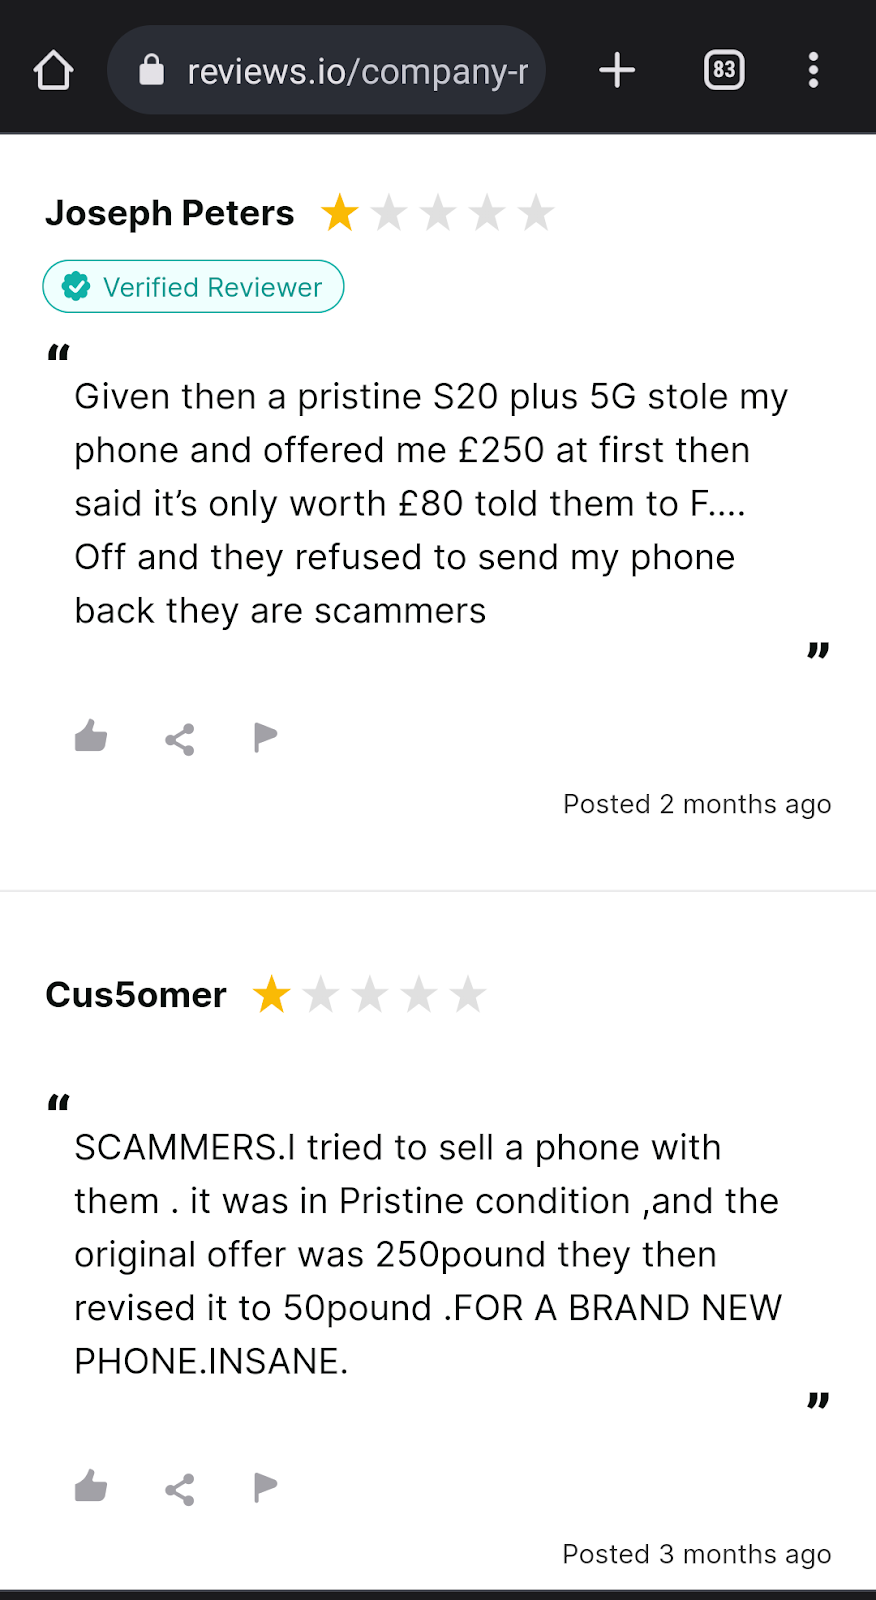 giffgaff Network Phone Service Reviews On Reviews.io Site